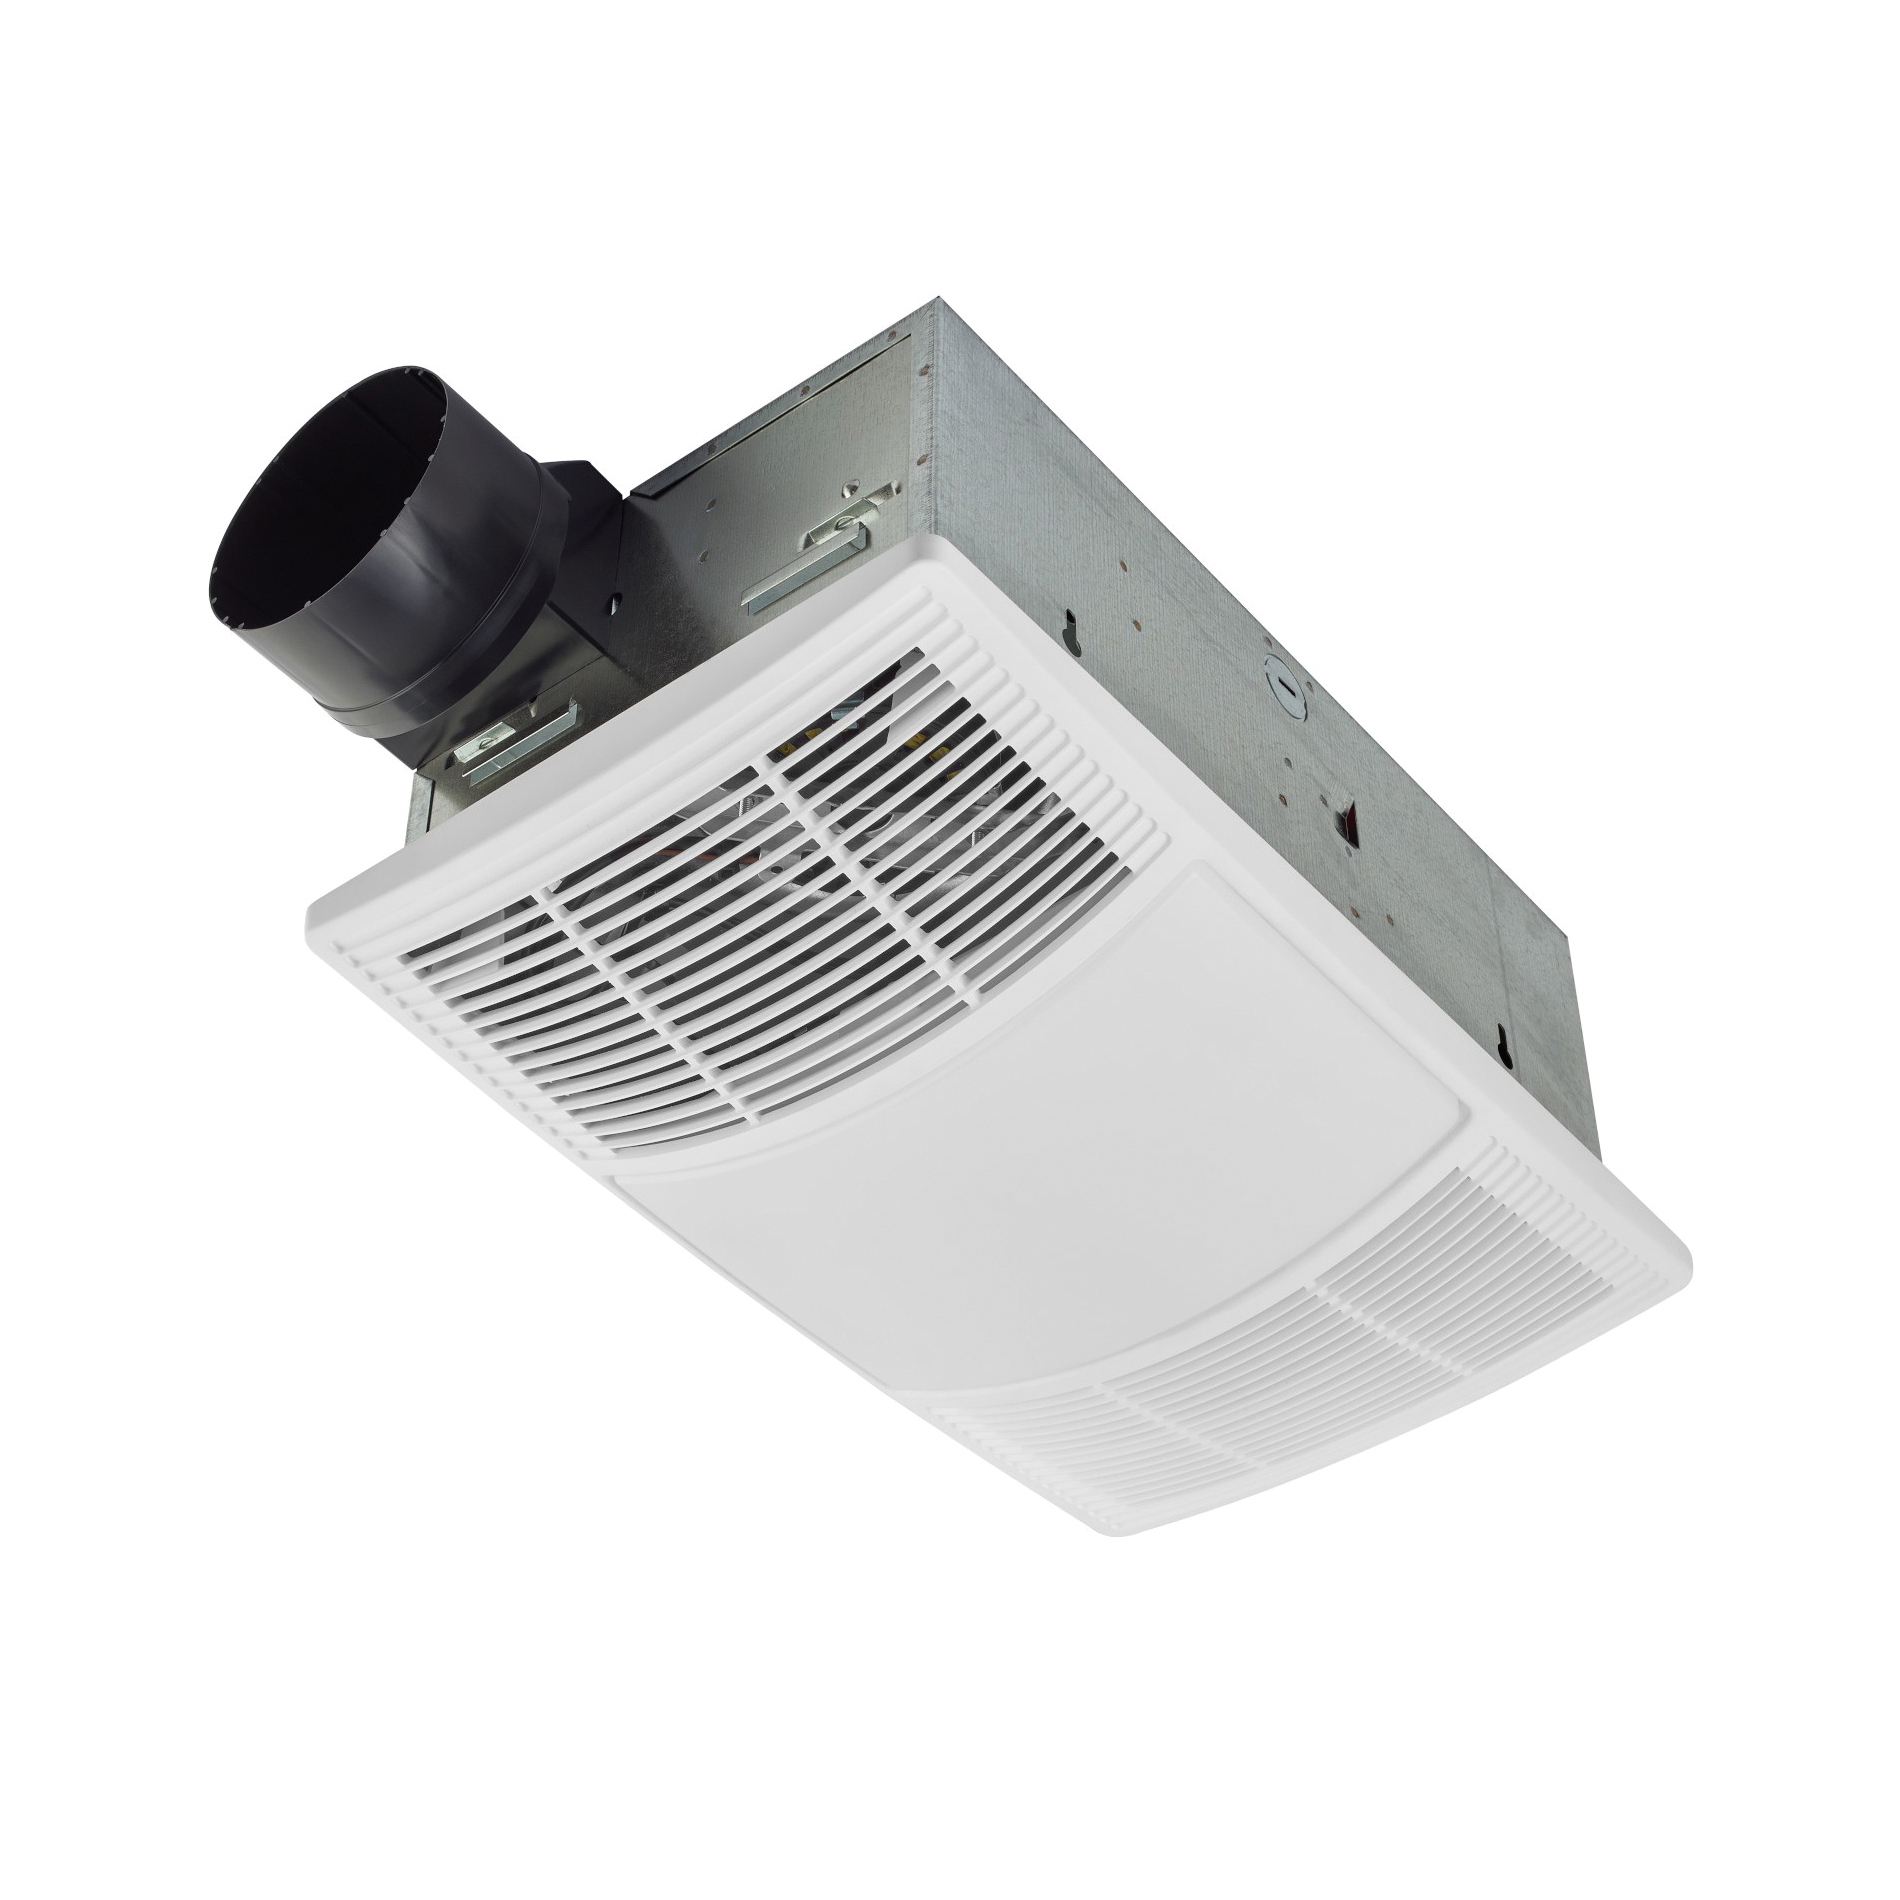 Broan PowerHeat Series BHFLED80 Heater Exhaust Fan, 12 A, 120 V, 80 cfm Air, 1.5 sones, LED Lamp, Infrared/Radiant